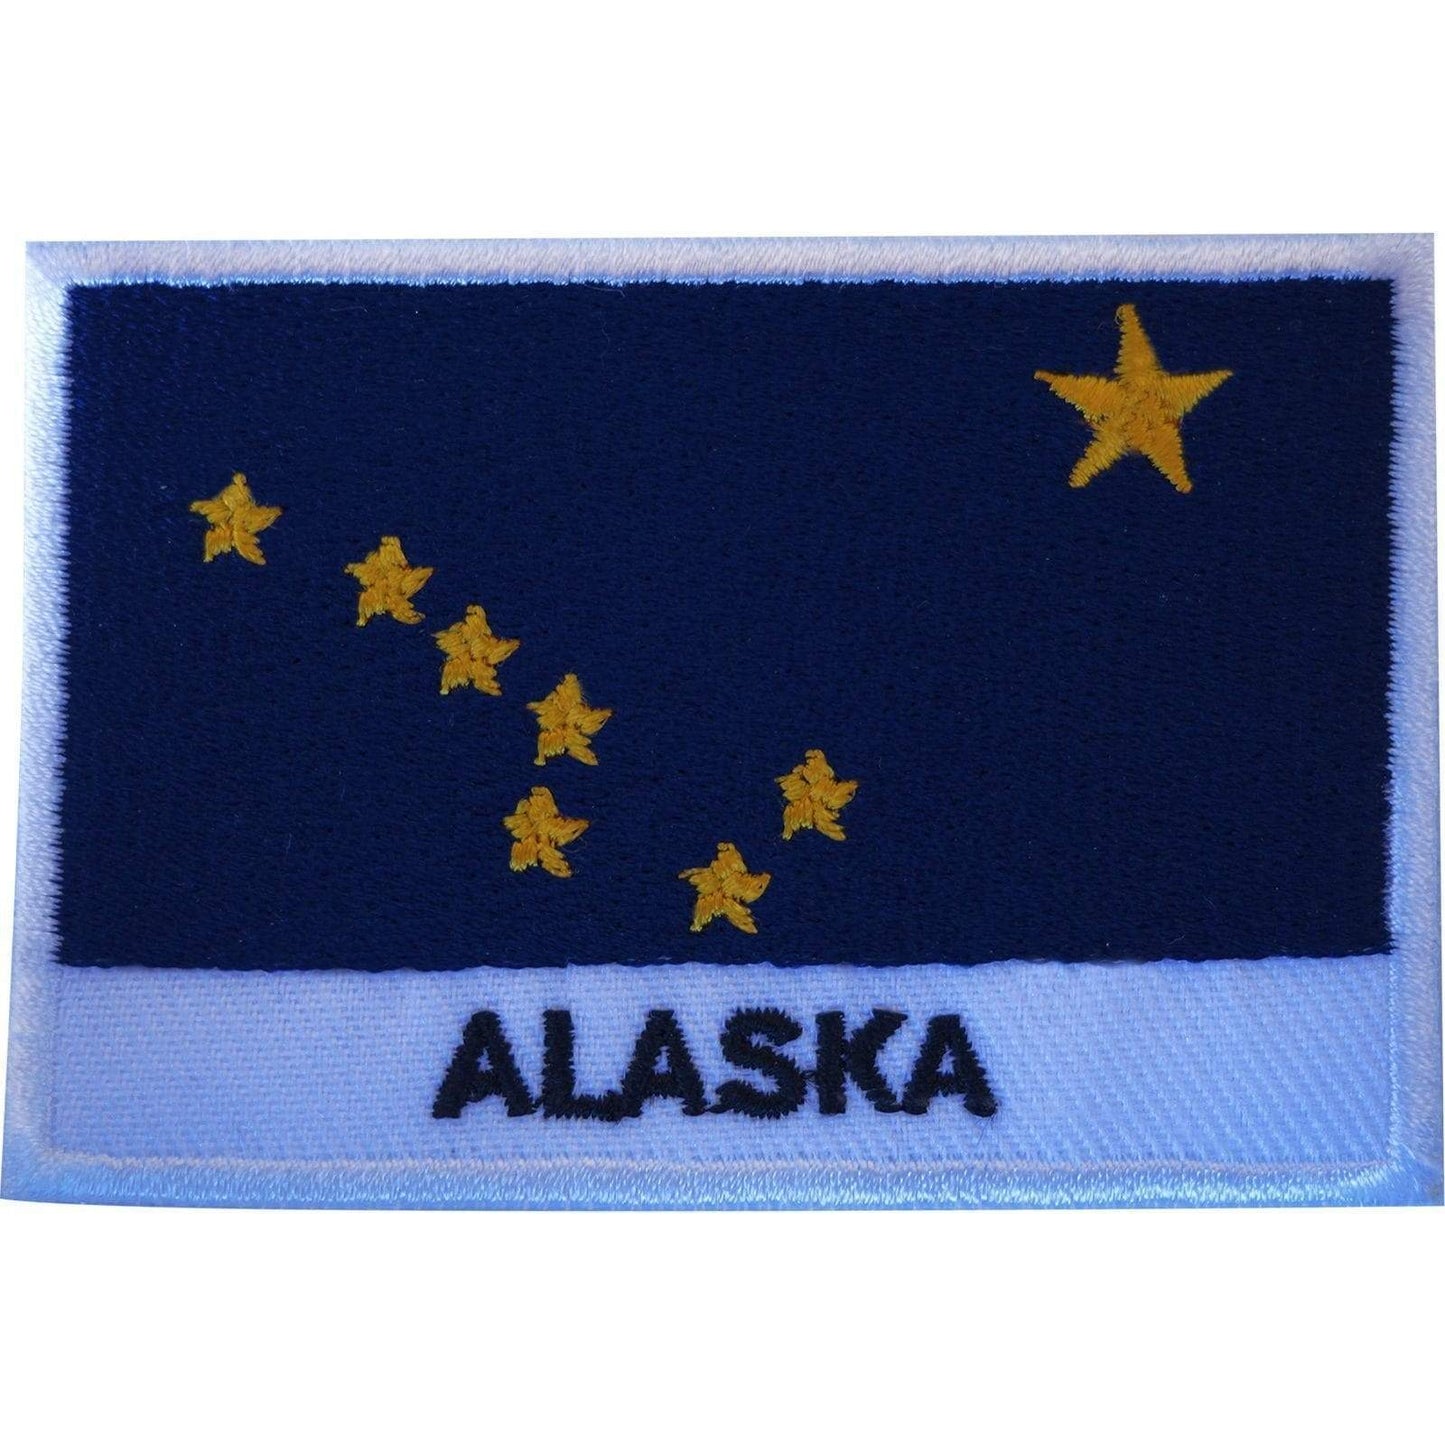 Embroidered Iron On Alaska Flag Patch Sew On Cloth Badge North America Canada US